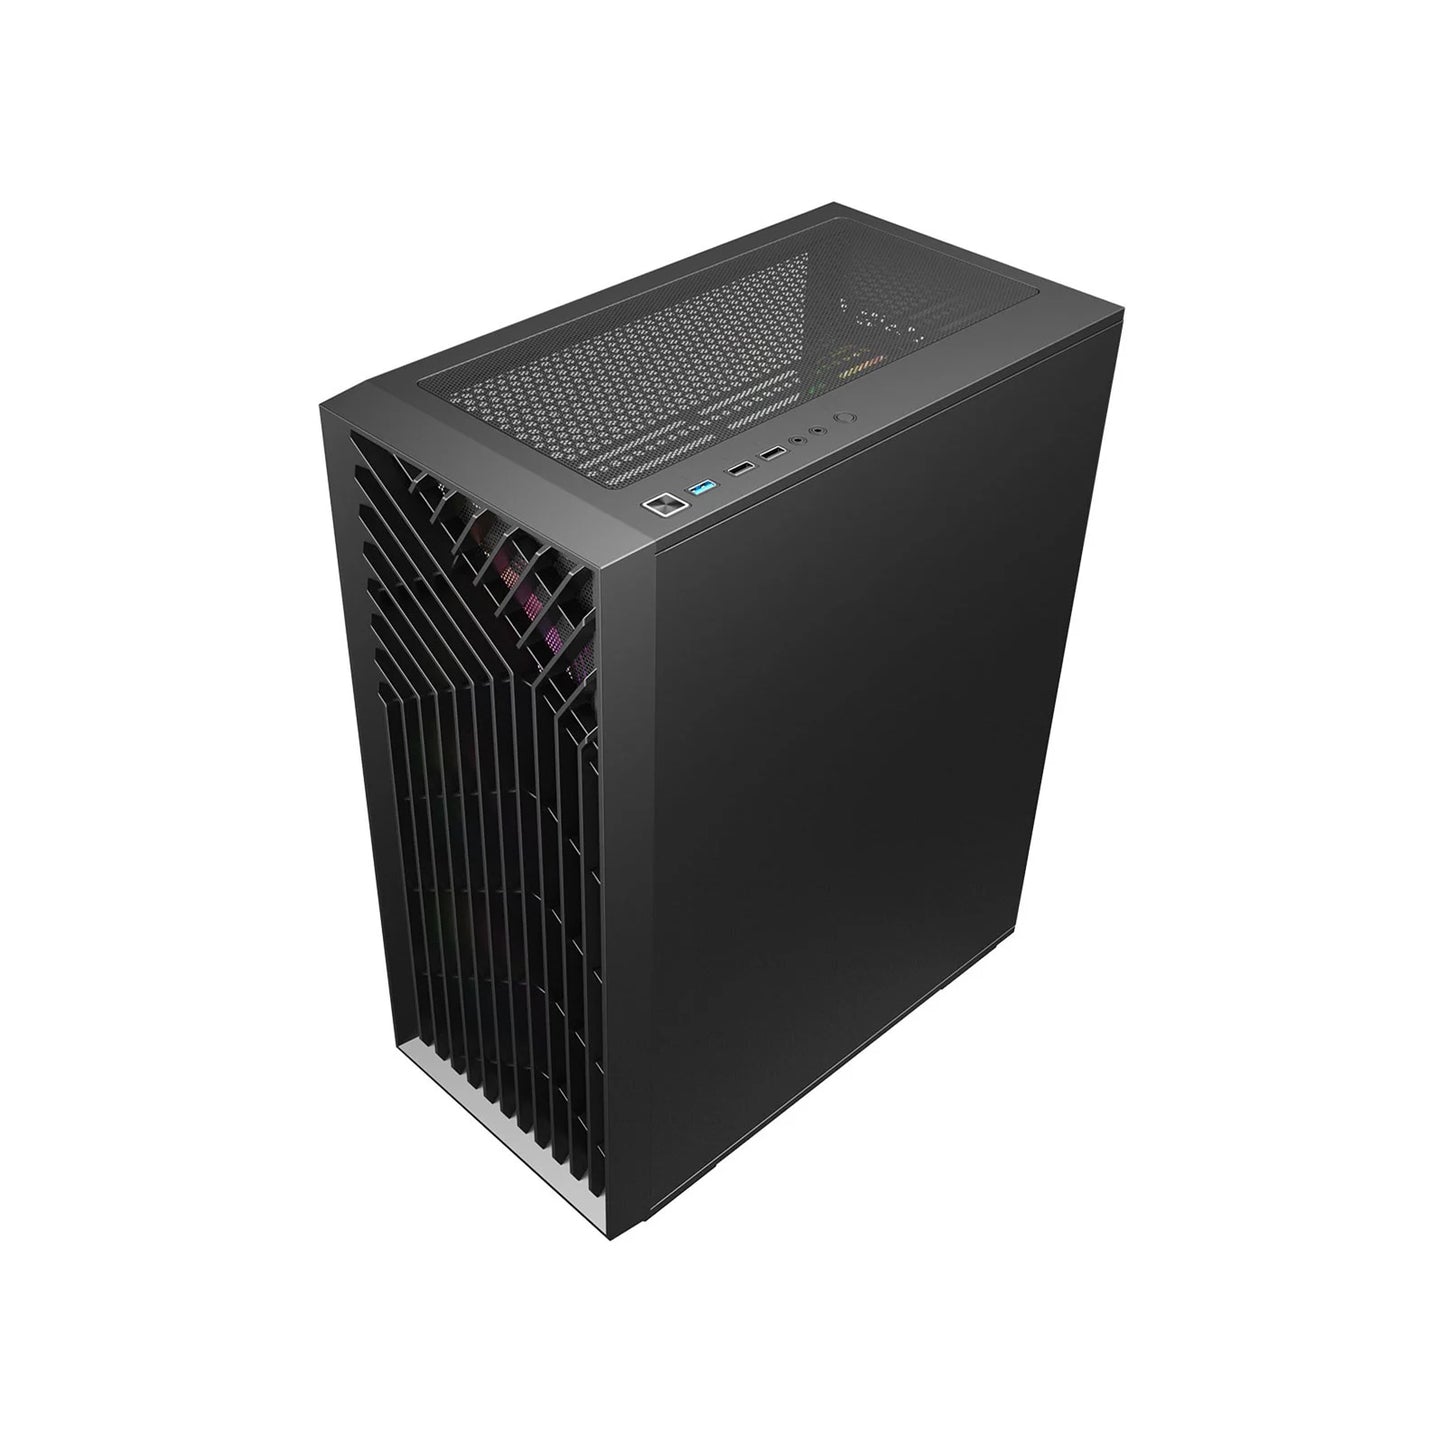 CiT Blade Mid Tower PC Gaming Case - tempered glass side panel Black CIT-BLADE-ARGB